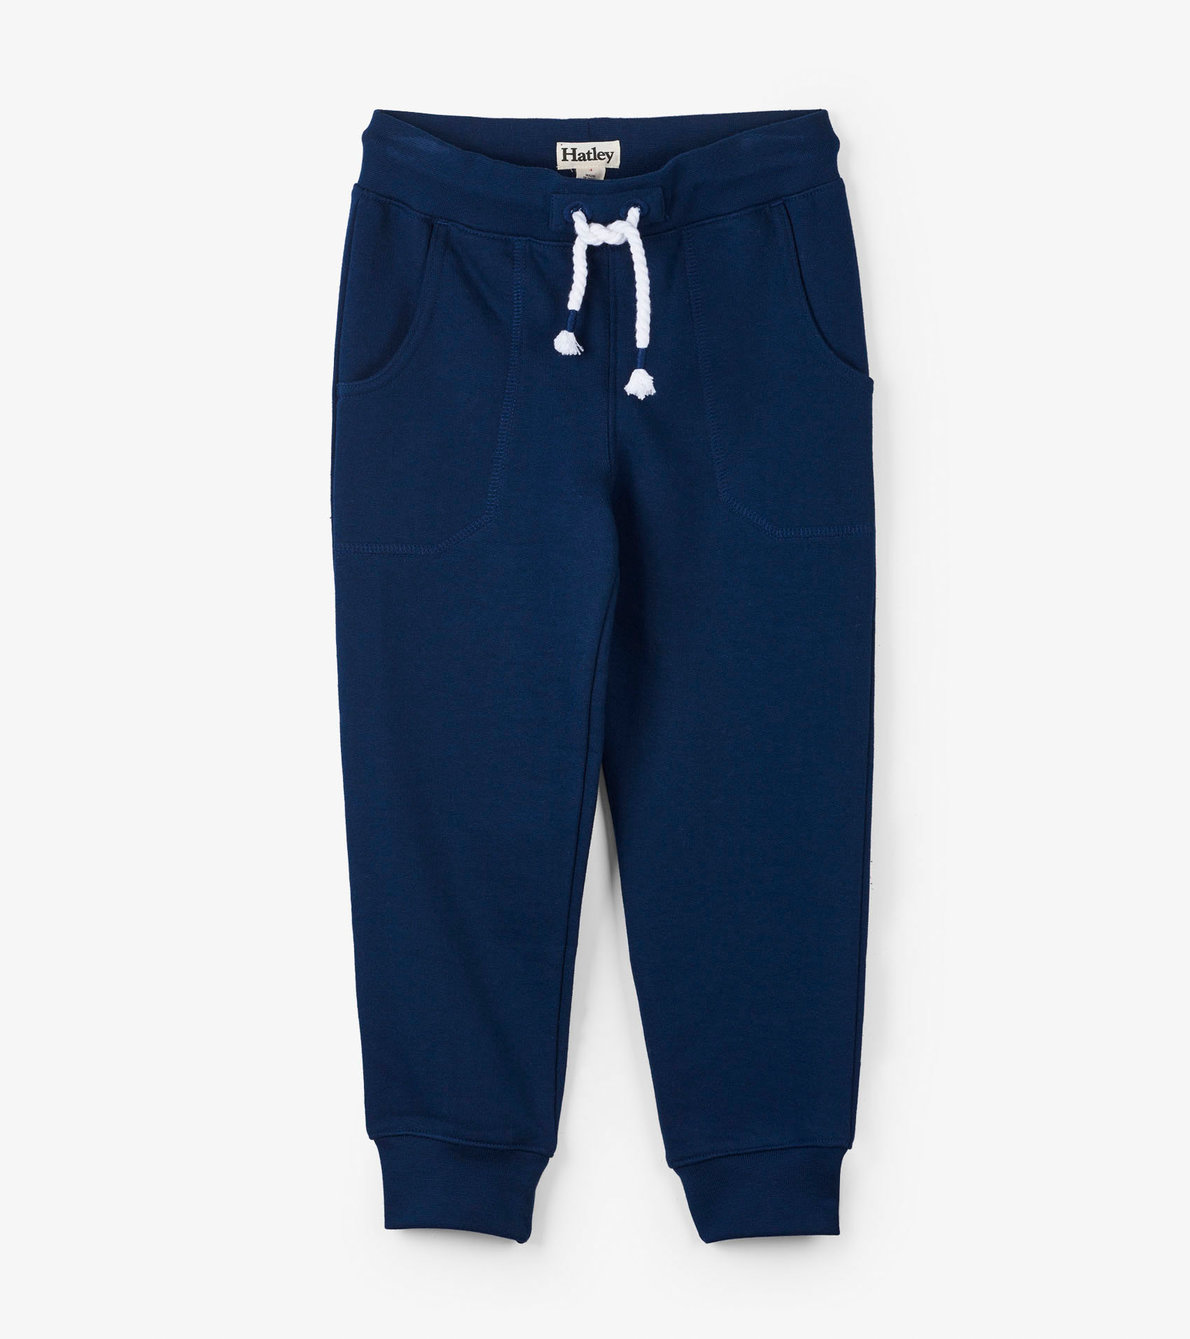 View larger image of Navy Slim Fit Joggers